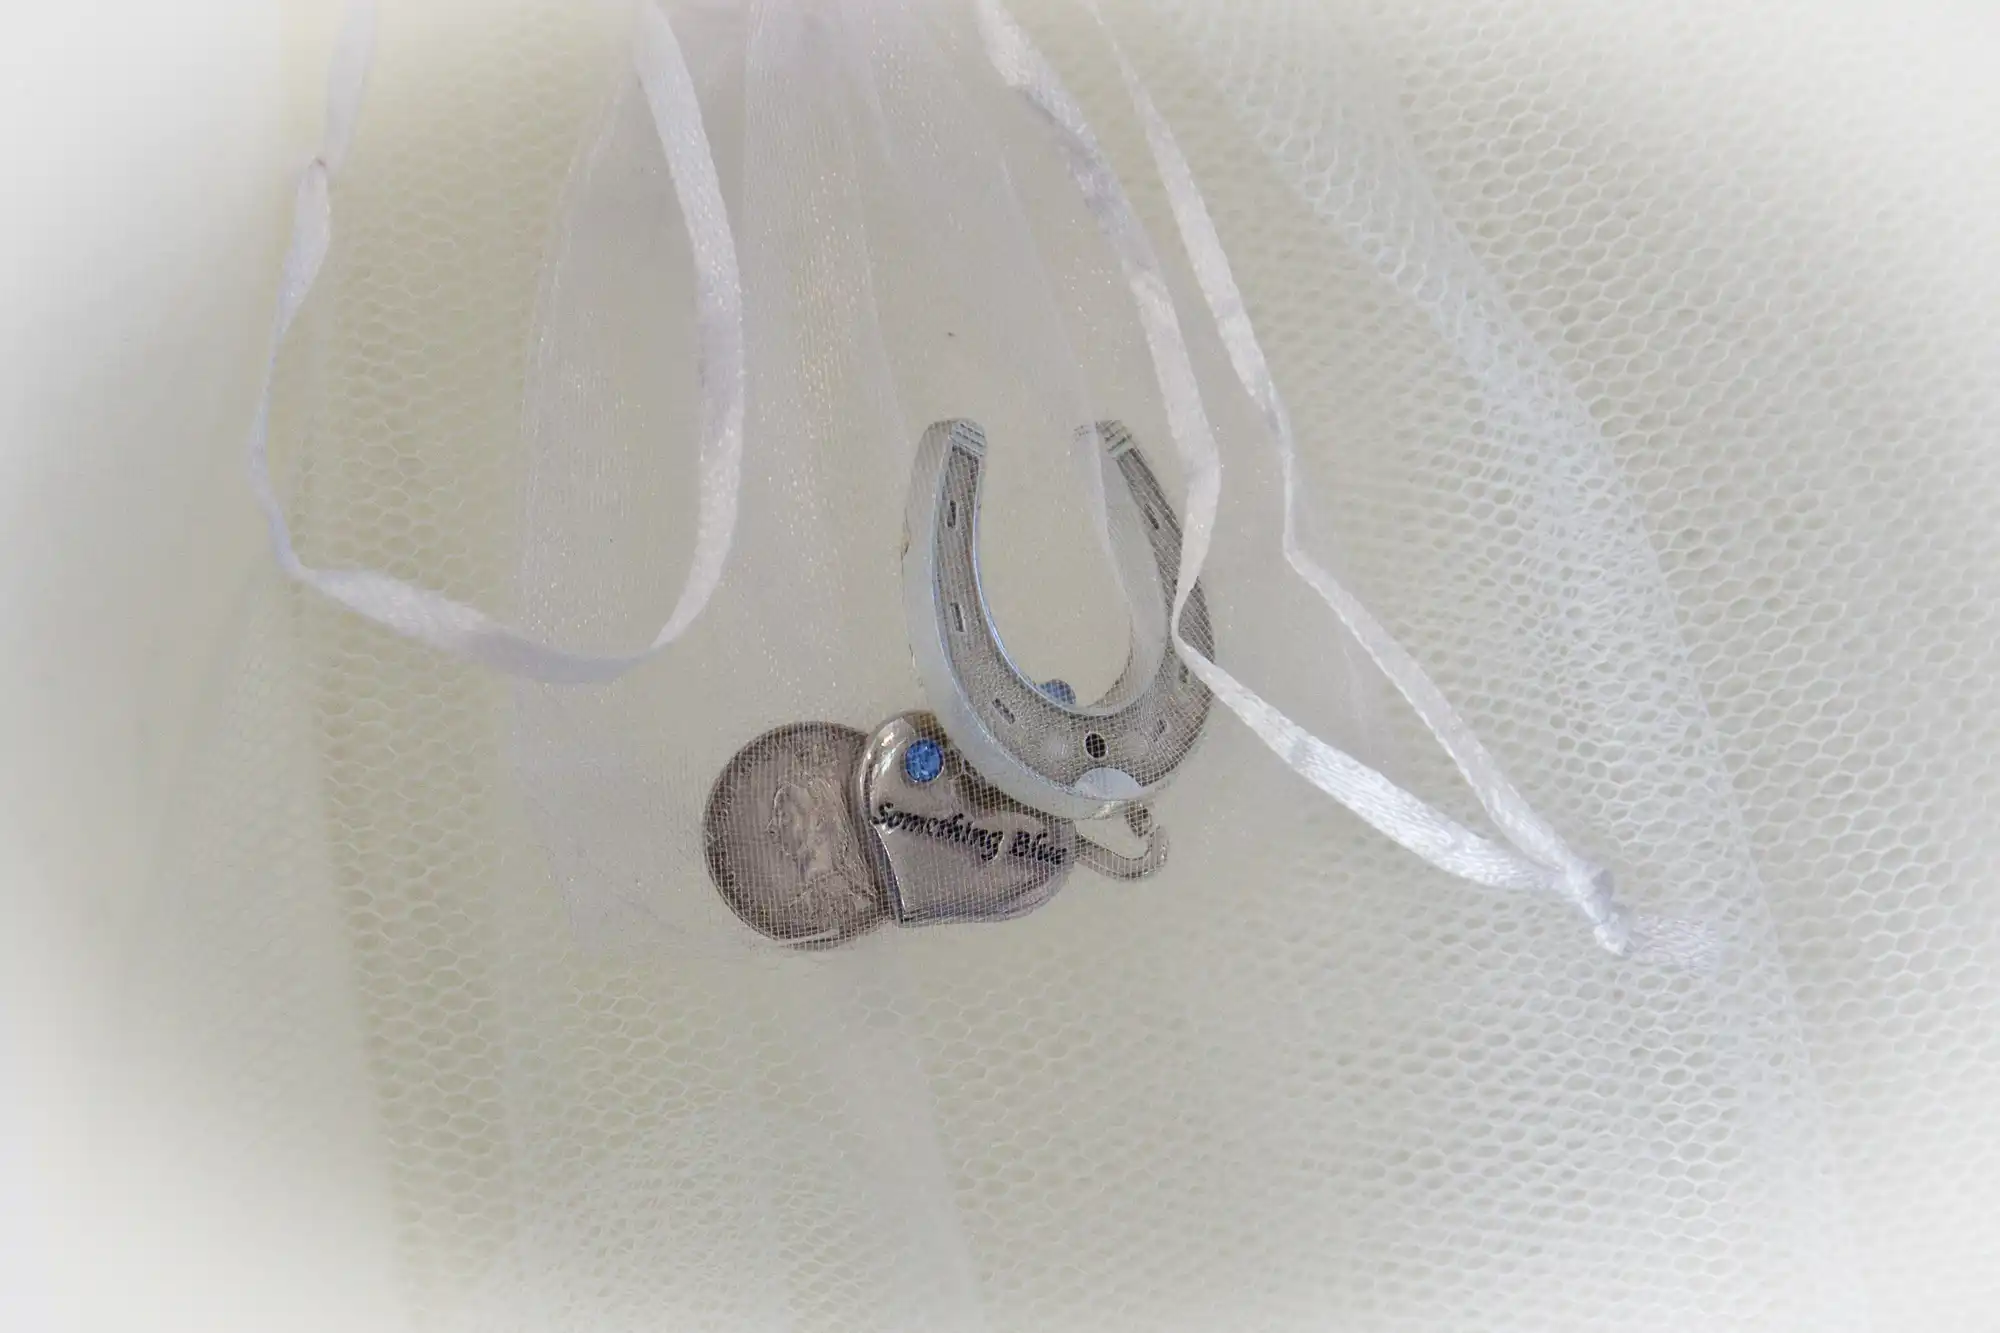 A silver horseshoe and heart charm with "something blue" text, attached to white tulle fabric.